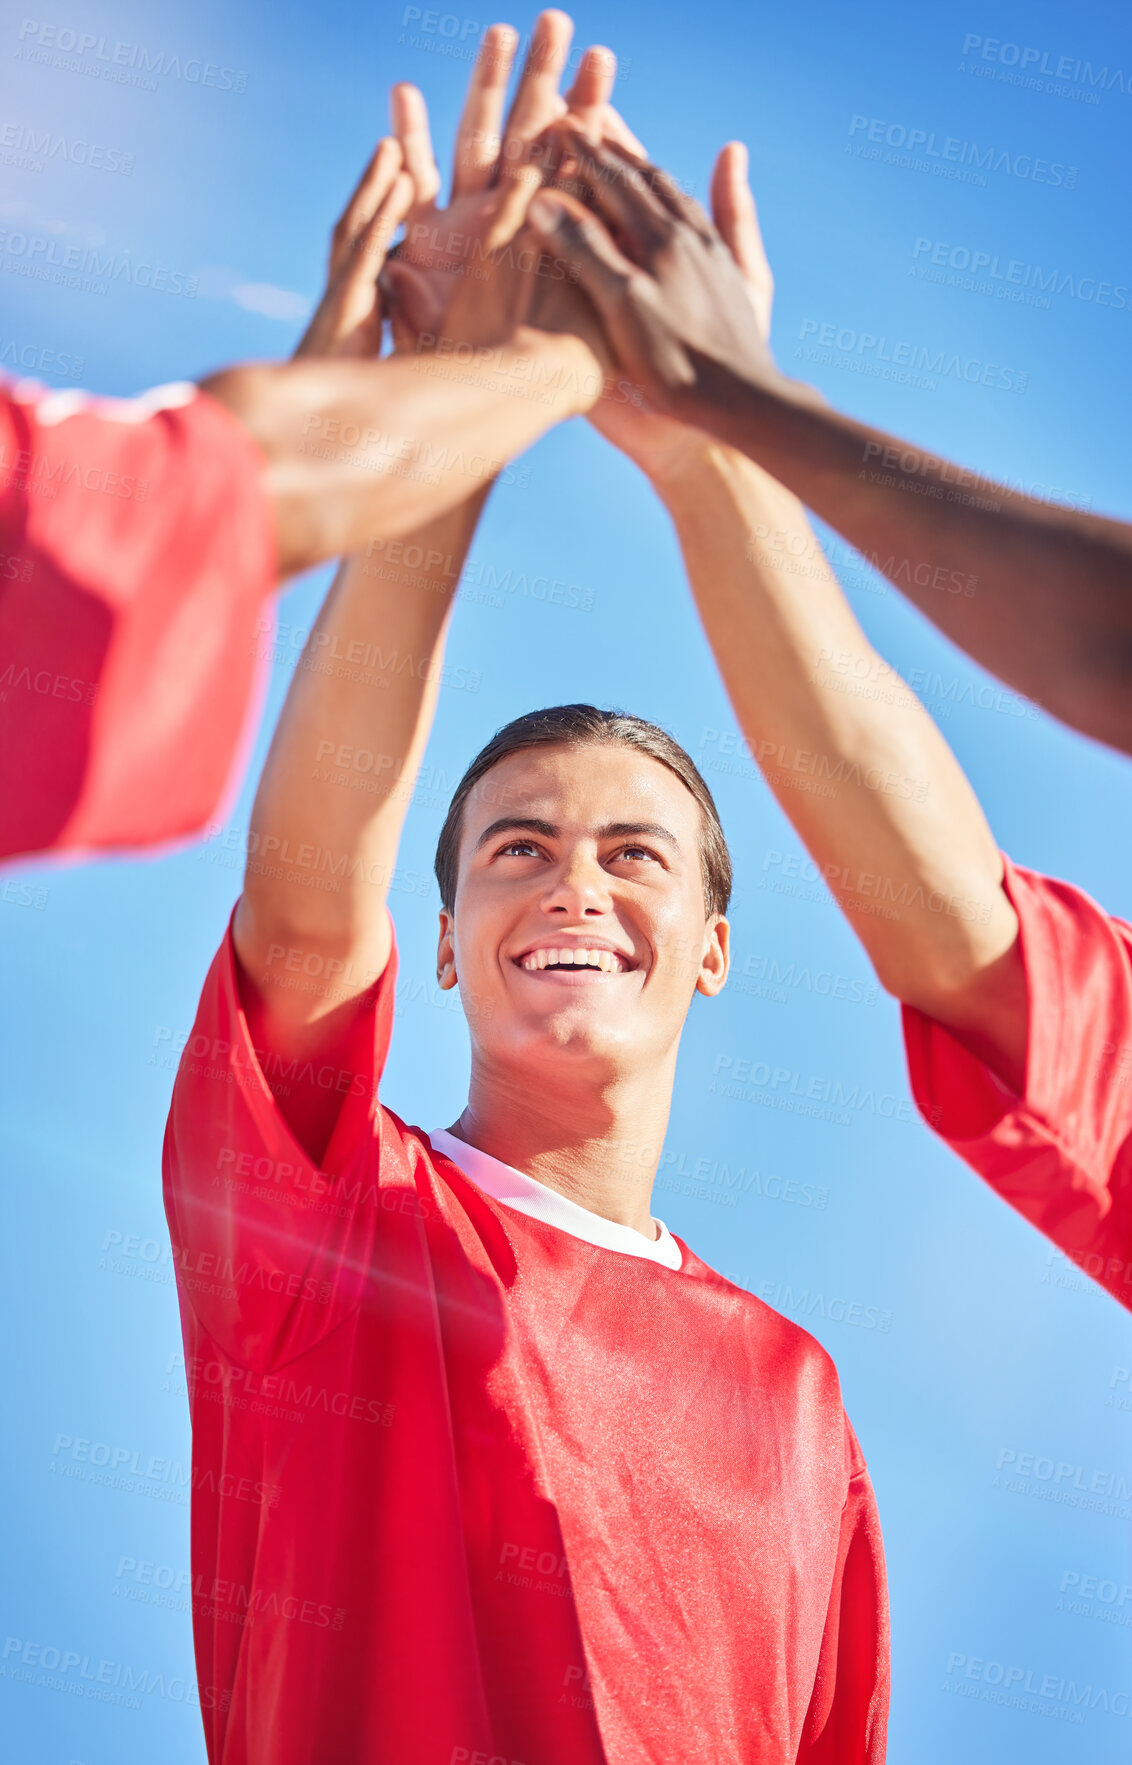 Buy stock photo High five, soccer and team in celebration of a goal and winning in a sports game or match outdoors in summer in Brazil. Success, fitness and happy friends or athletes reaching football score targets